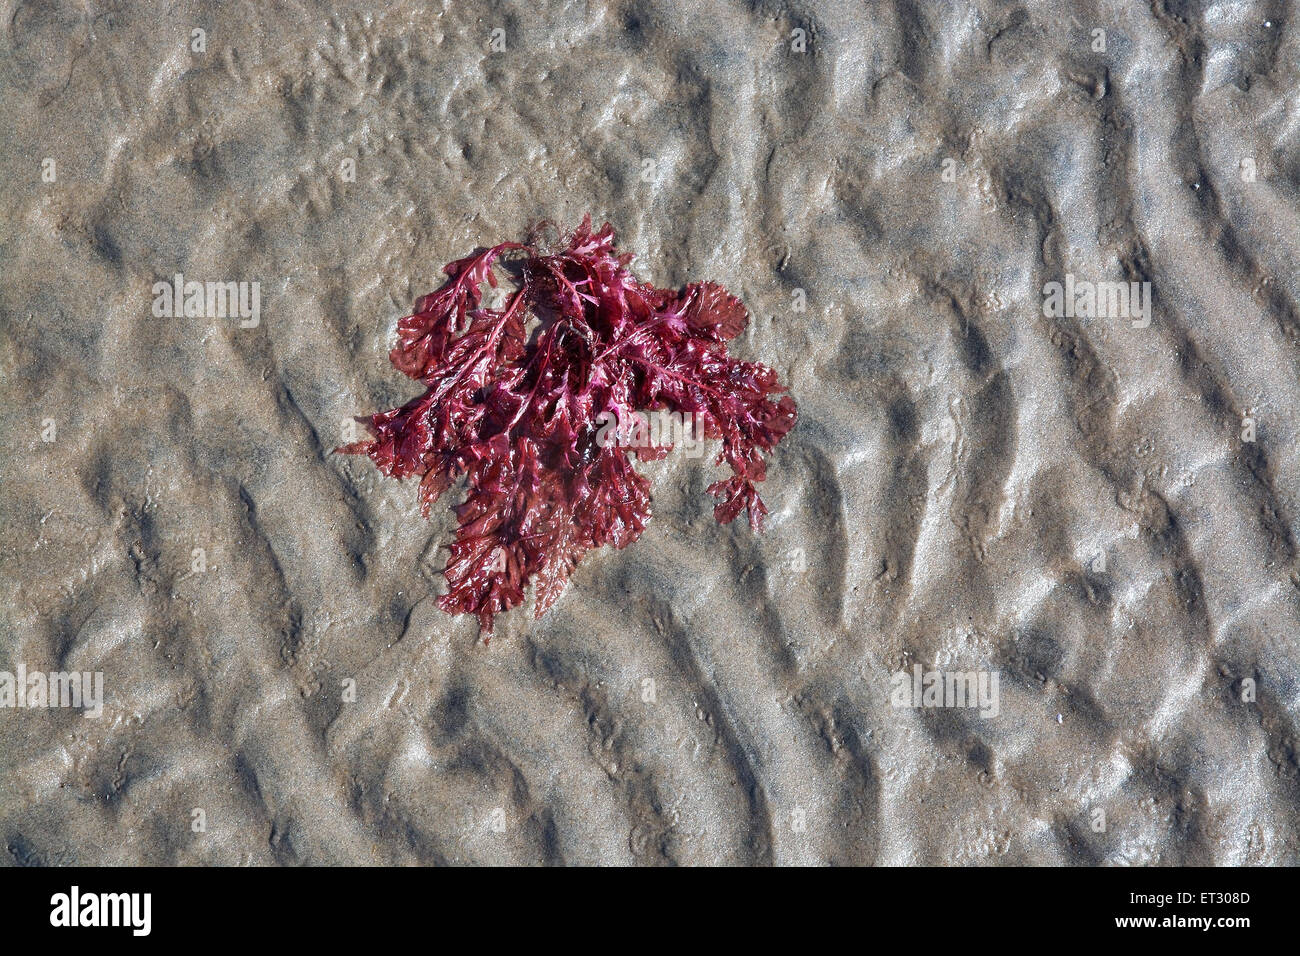 Abstract sand and red seaweed pattern, seaside natural organic landscape detail. Stock Photo